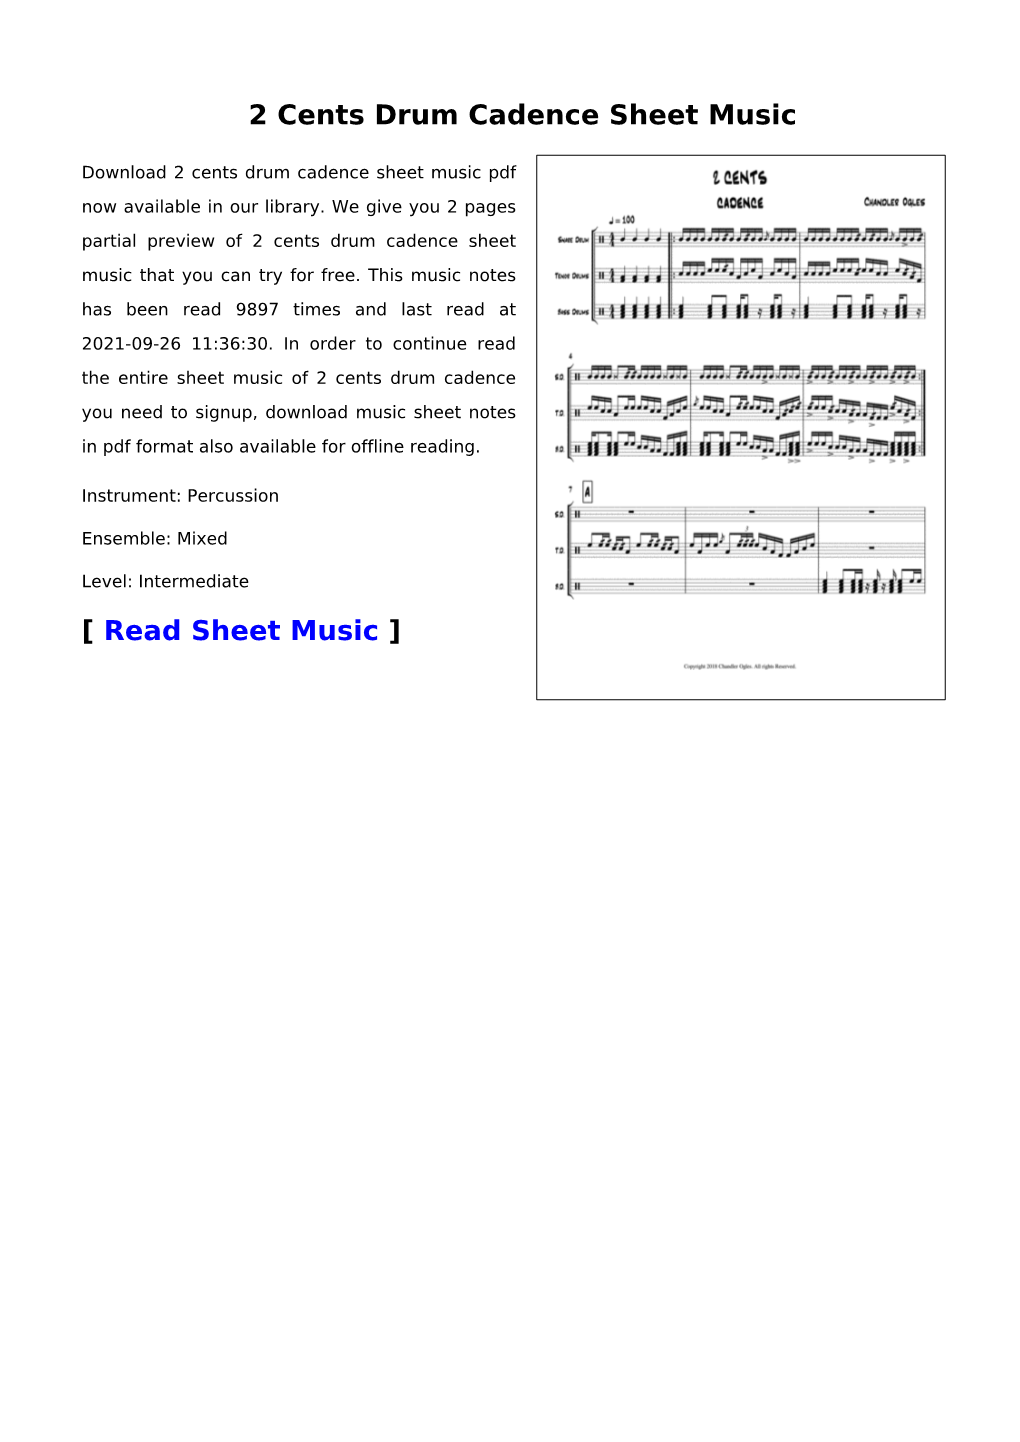 2 Cents Drum Cadence Sheet Music